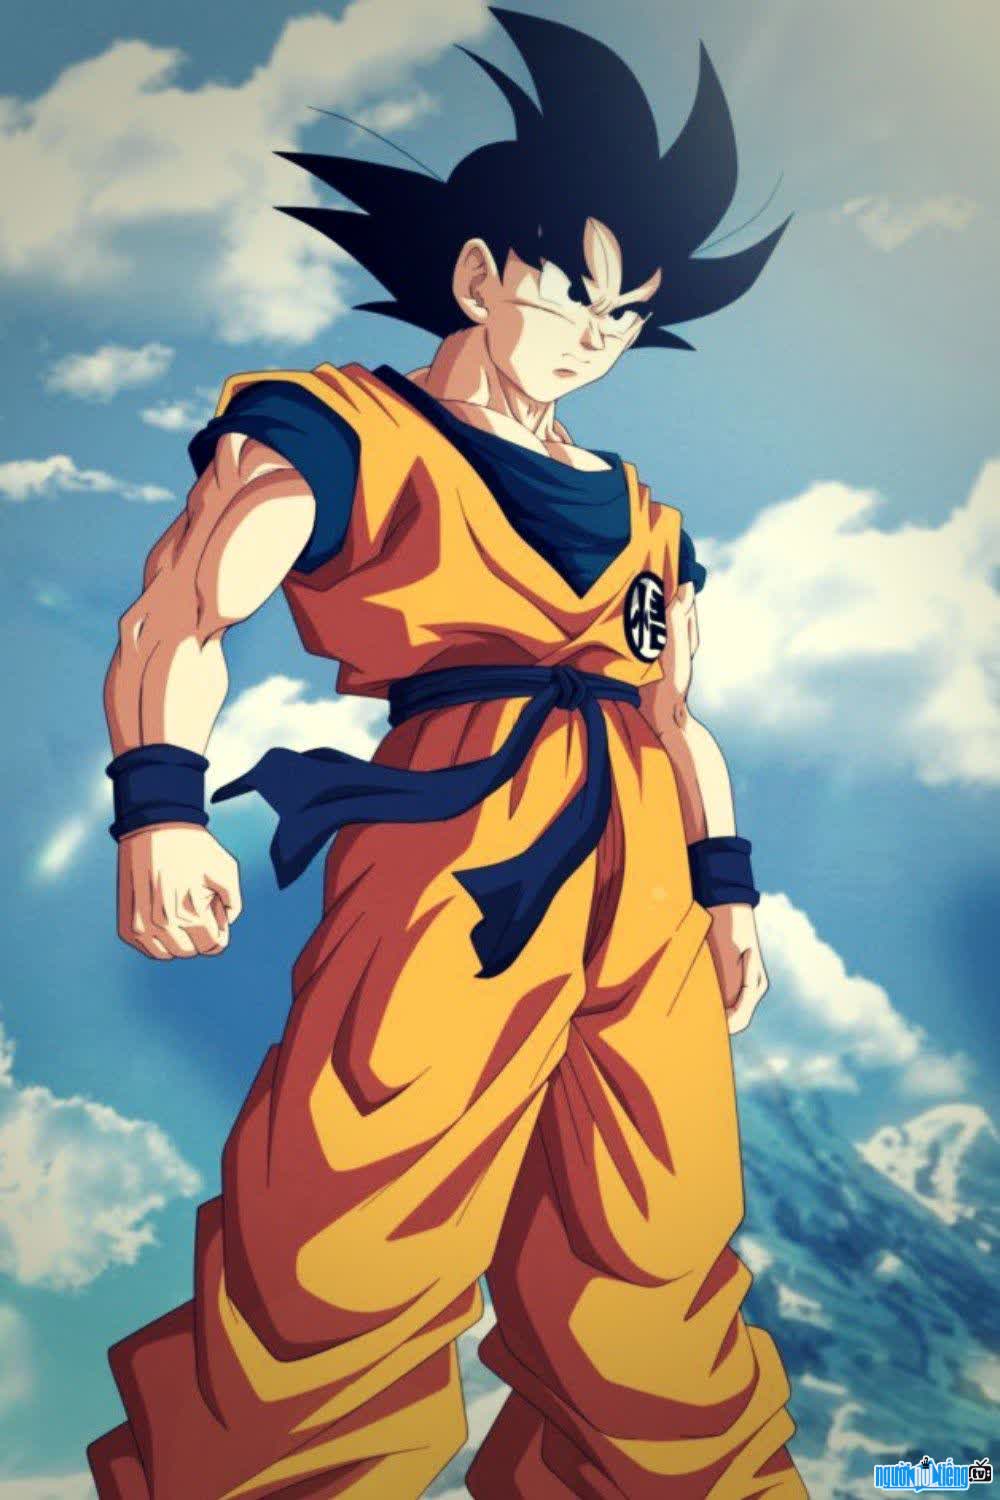 Goku has a unique spiky black hair that never changes due to the Saiya gene.